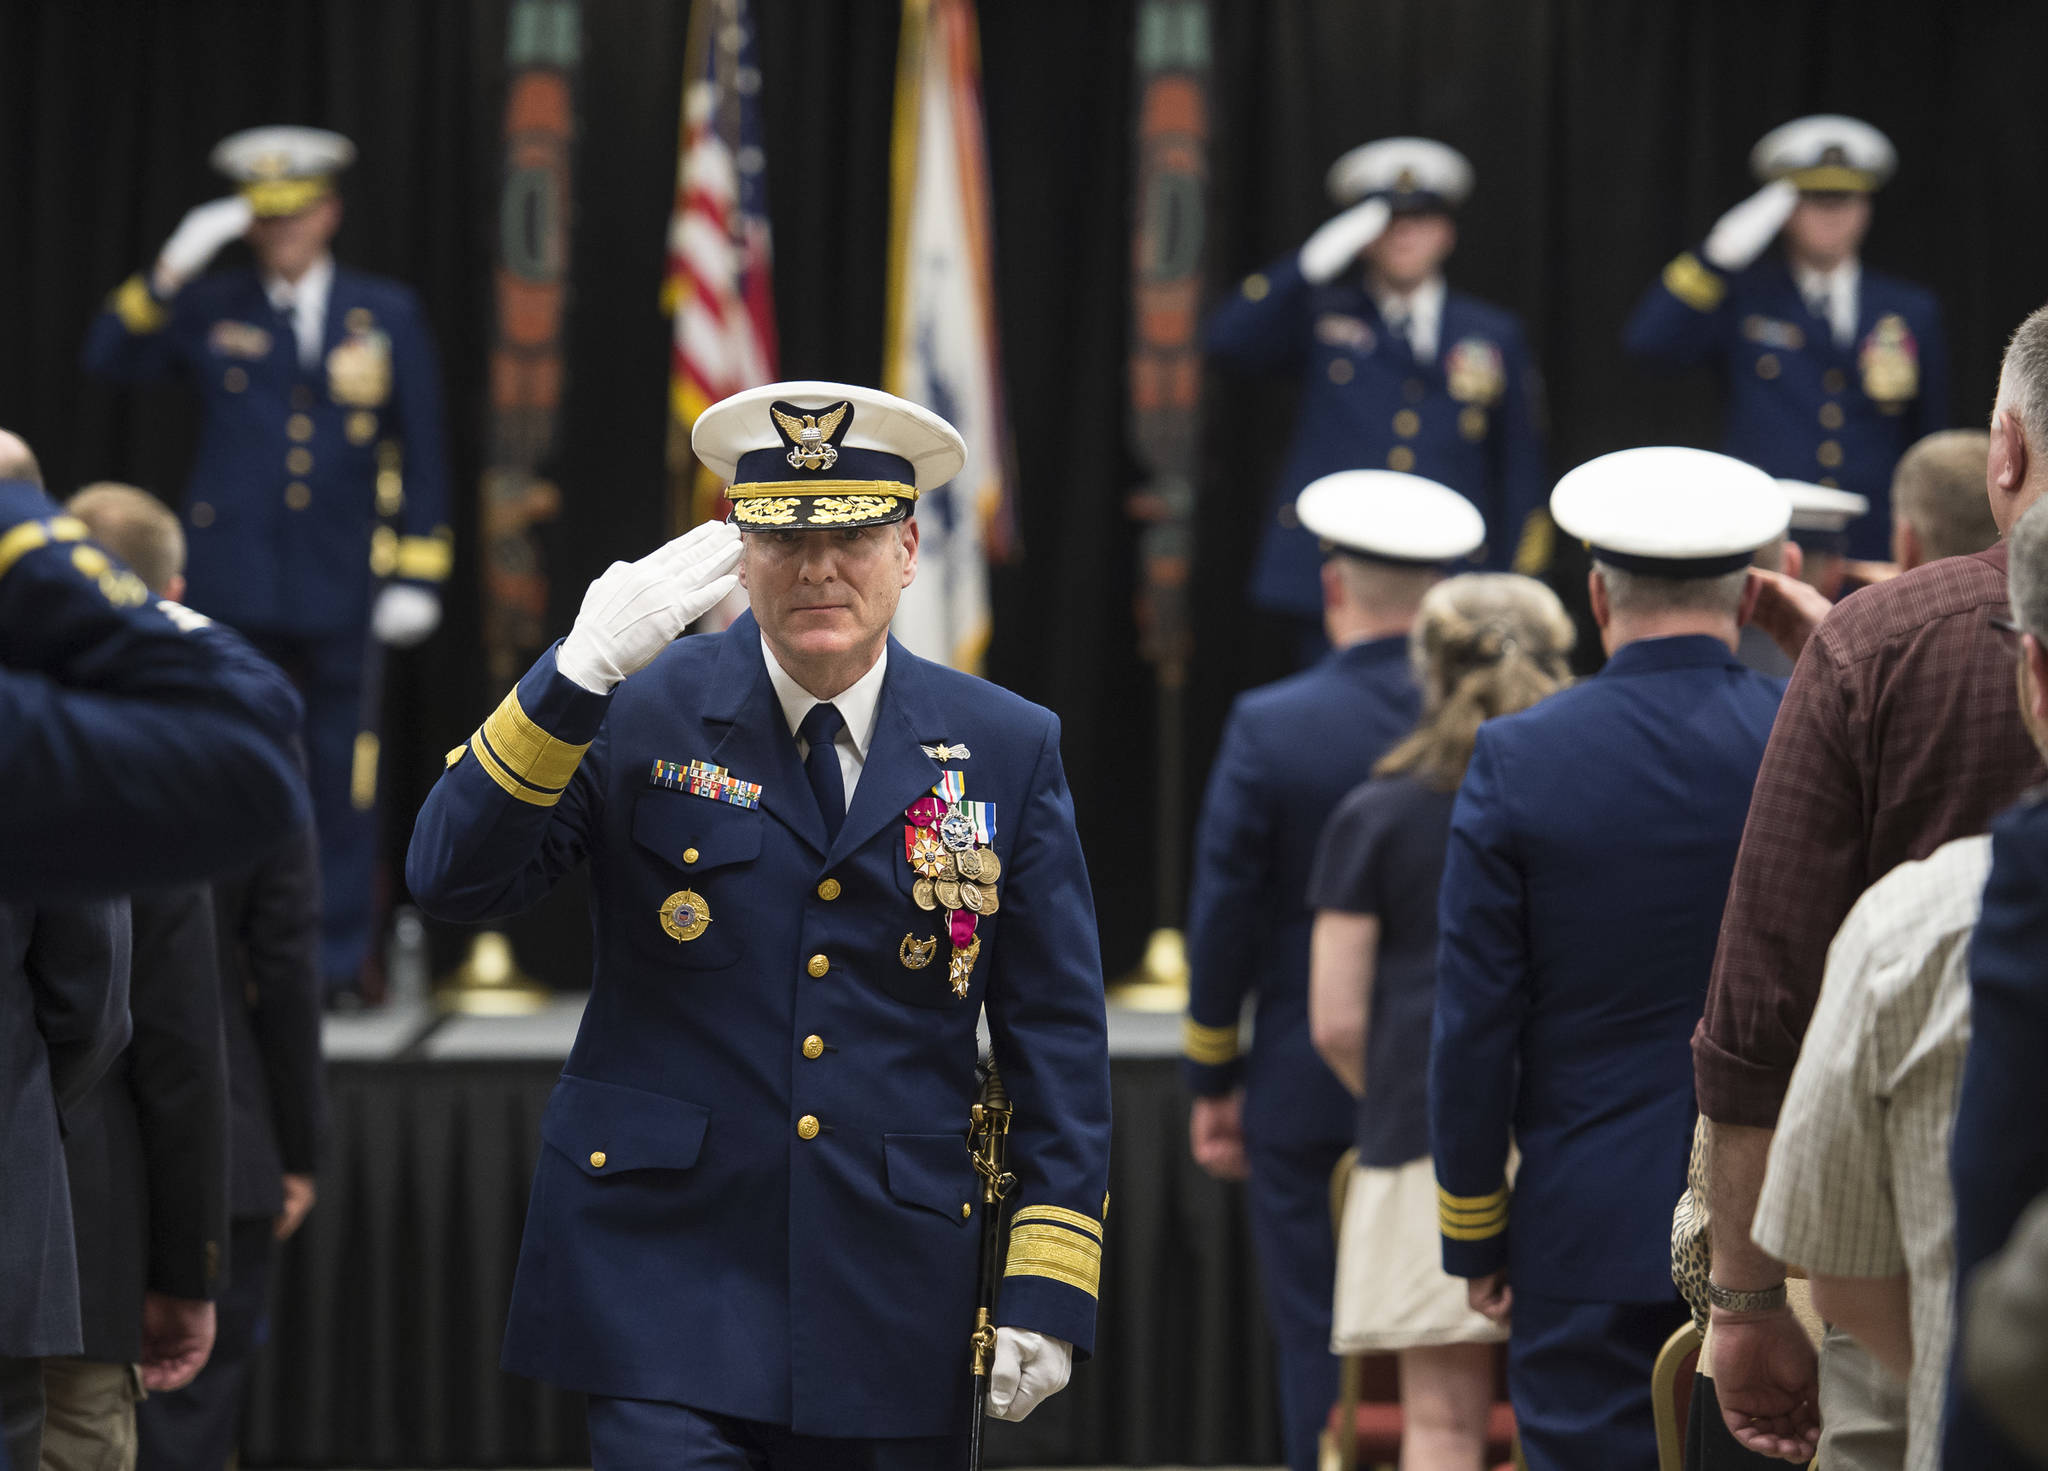 Rear Admiral Michael F. McAllister, outgoing Commander of the Coast Guard 17th District, leaves the stage during a Change of Command Ceremony for the U.S. Coast Guard 17th District at the Elizabeth Peratrovich Hall on Wednesday, May 9, 2018. (Michael Penn | Juneau Empire)